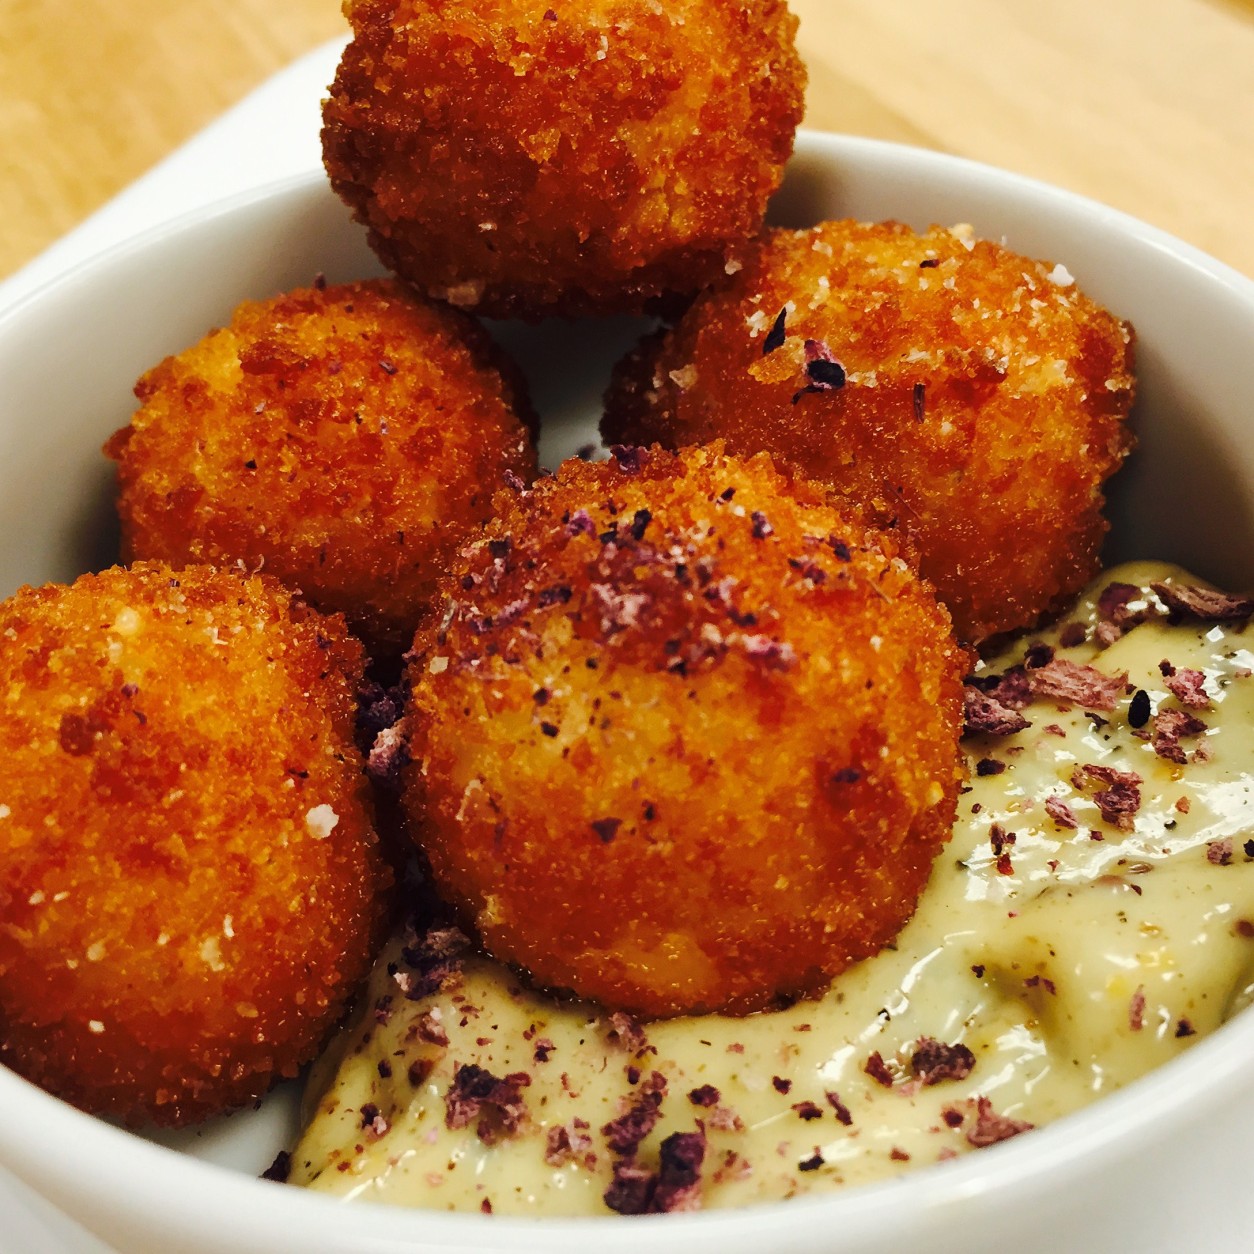 Trummer's on Main, a restaurant in Clifton, Virginia, recently launched a tasting menu for children. Pictured: smoked mozzarella arancini with escabeche. (Courtesy Dusty Lockhart)